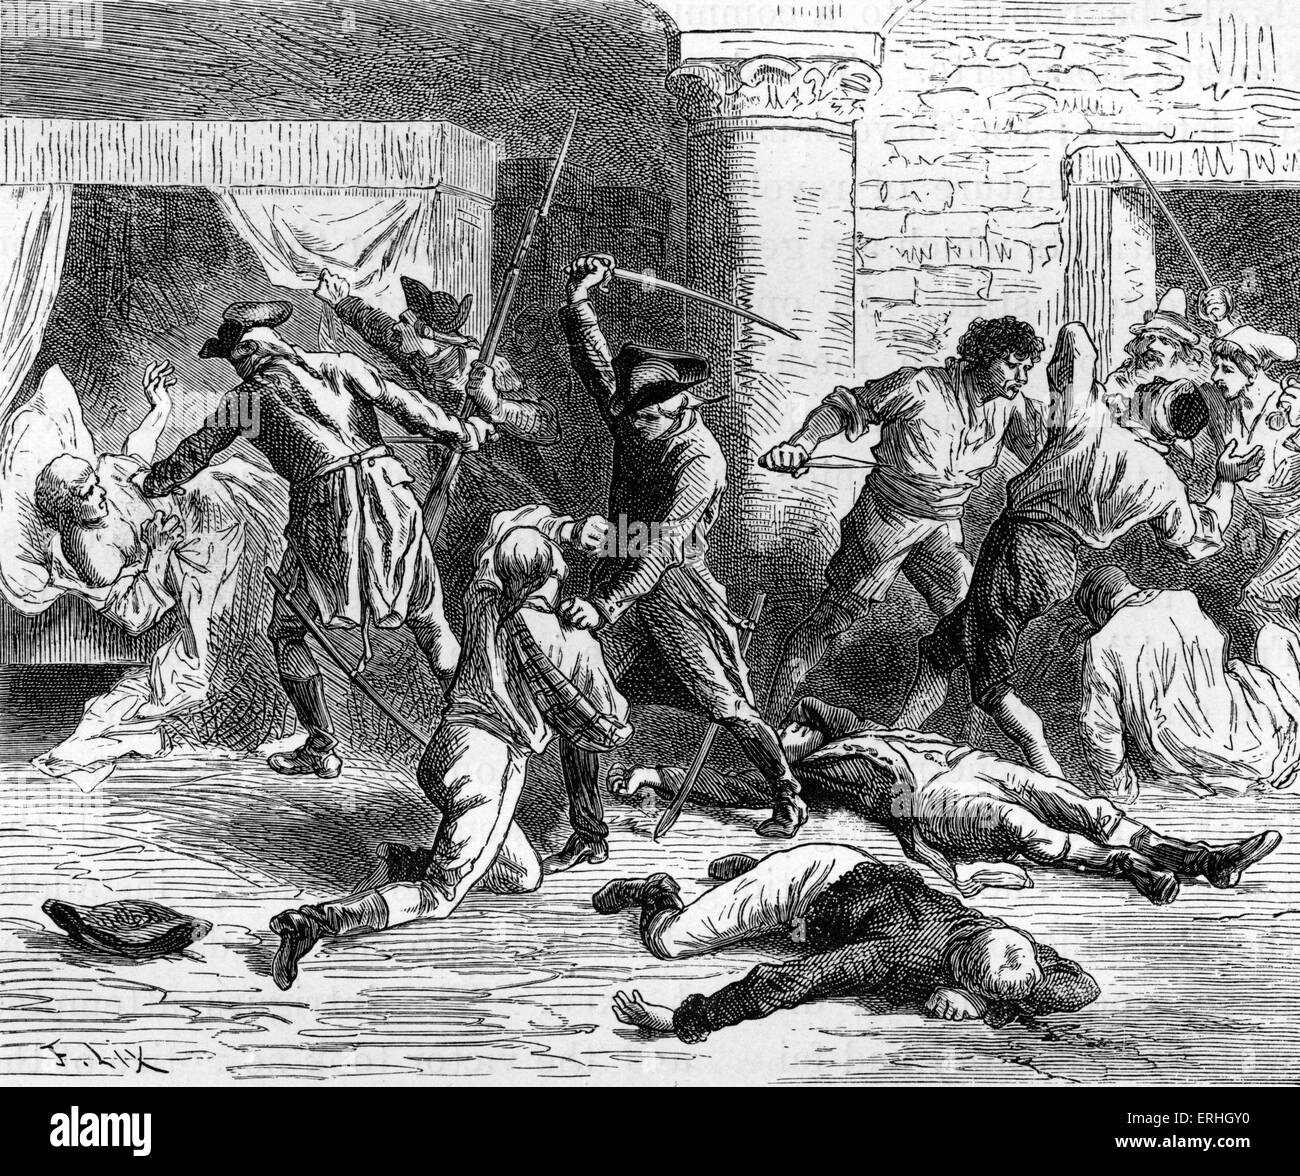 Massacre of the French at Venice, c. 1797. Soldiers with swords and bayonets kill unarmed French people during Napoleon's attack on Venice. Napoleonic wars. Stock Photo